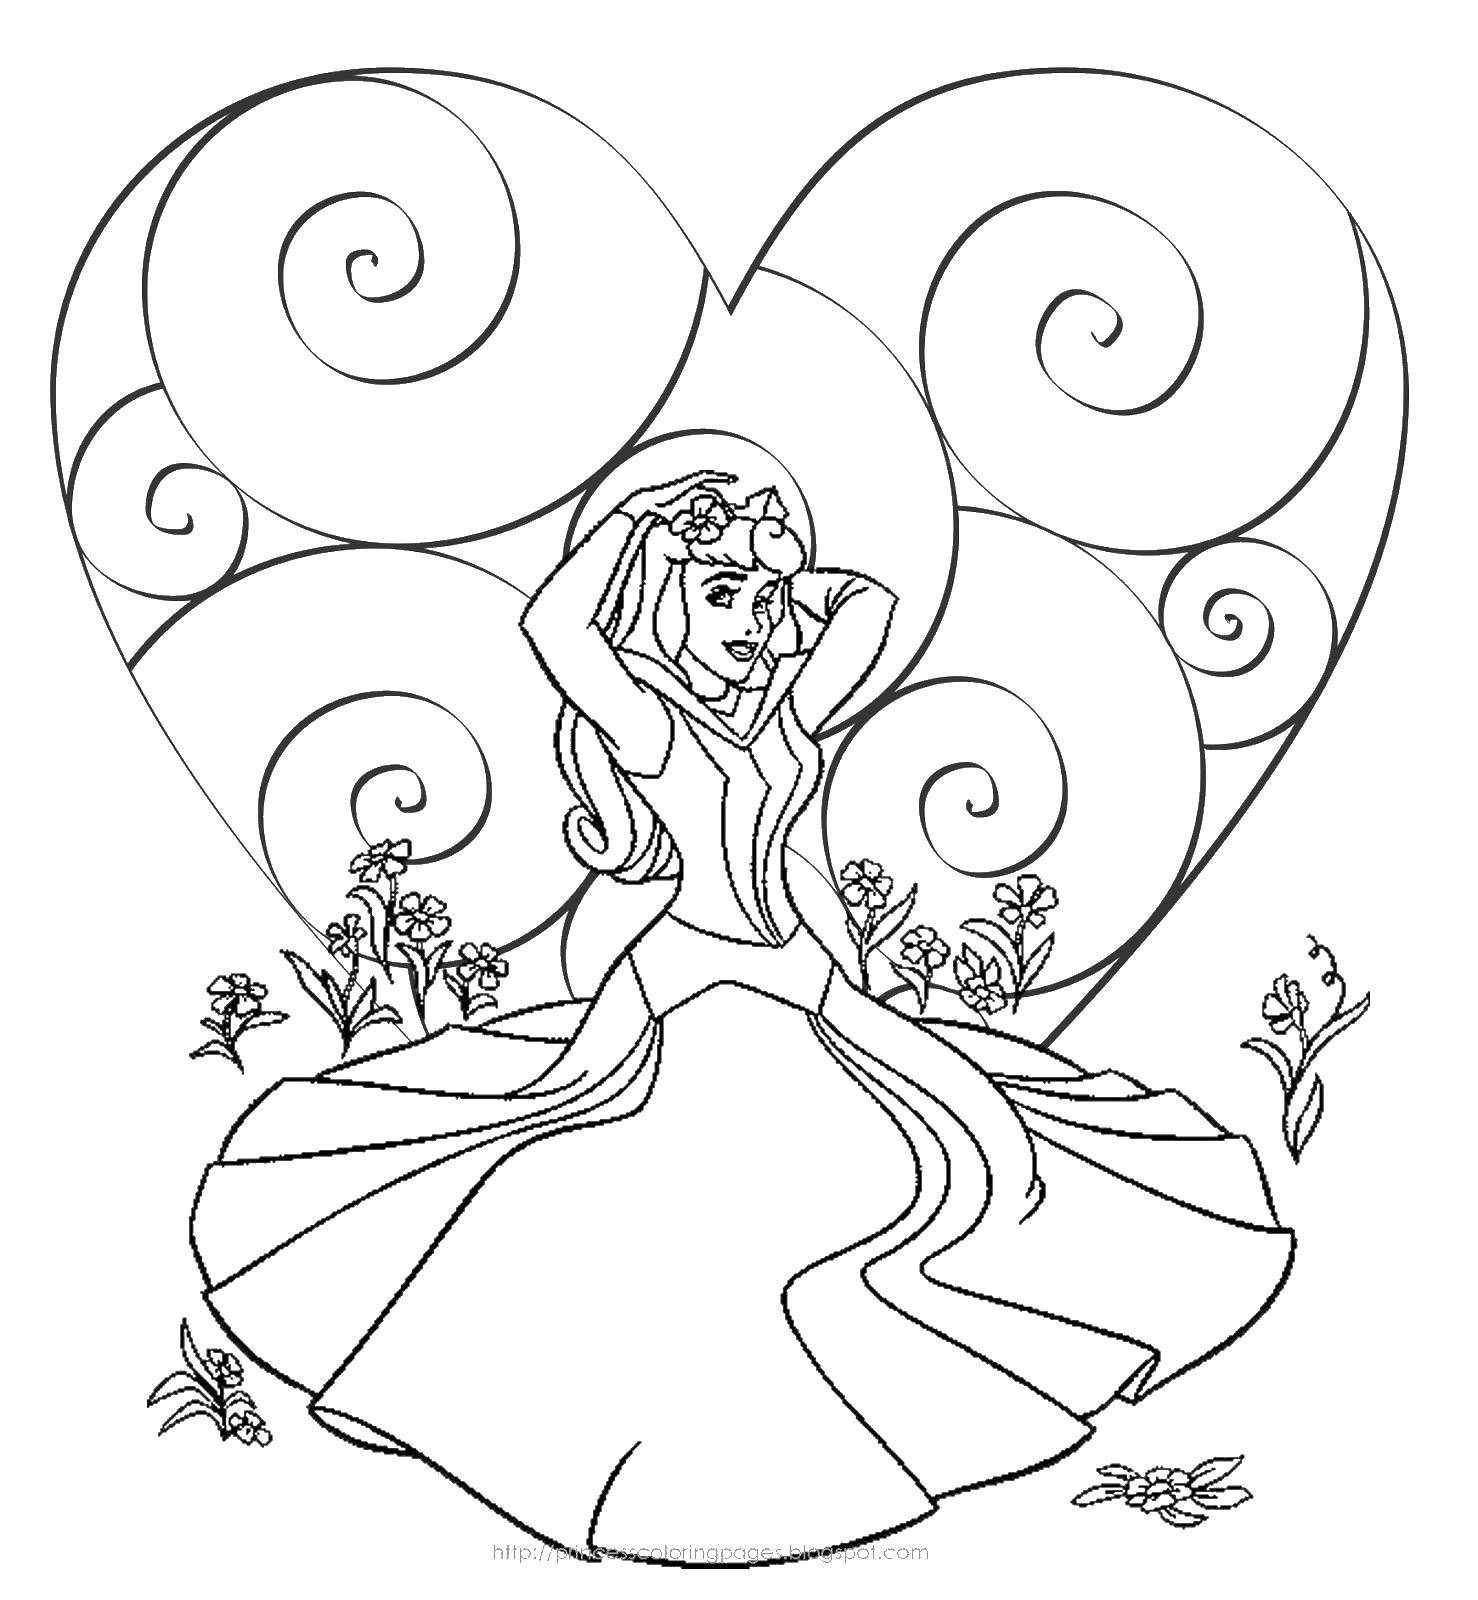 Coloring Princess Aurora with flowers. Category Princess. Tags:  Princess, Aurora.